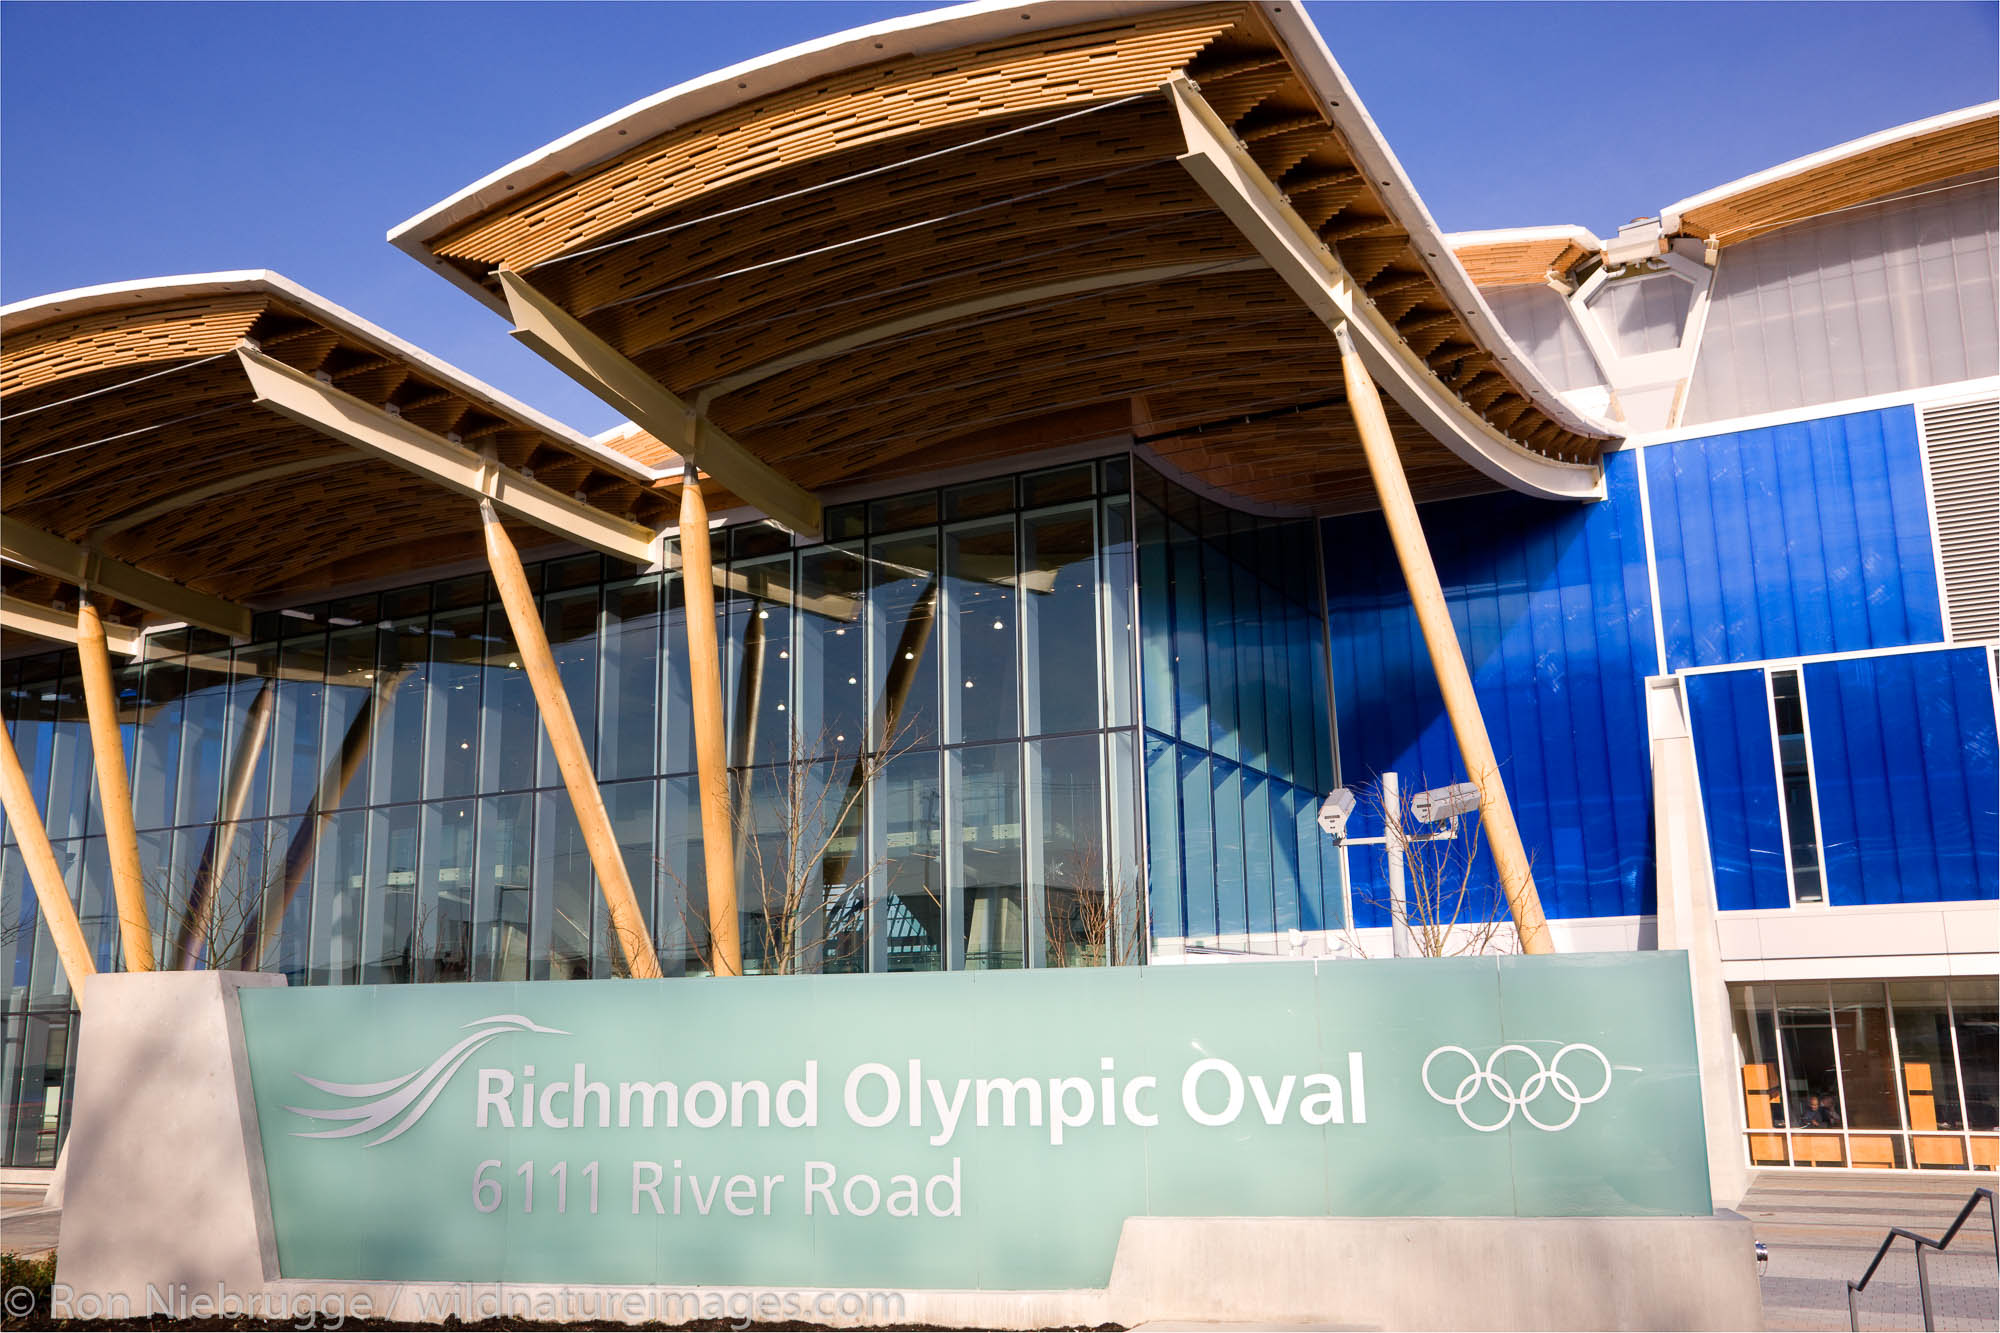 Richmond Olympic Oval, speed skating venue for the 2010 Vancouver Winter Olympics, British Columbia, Canada.